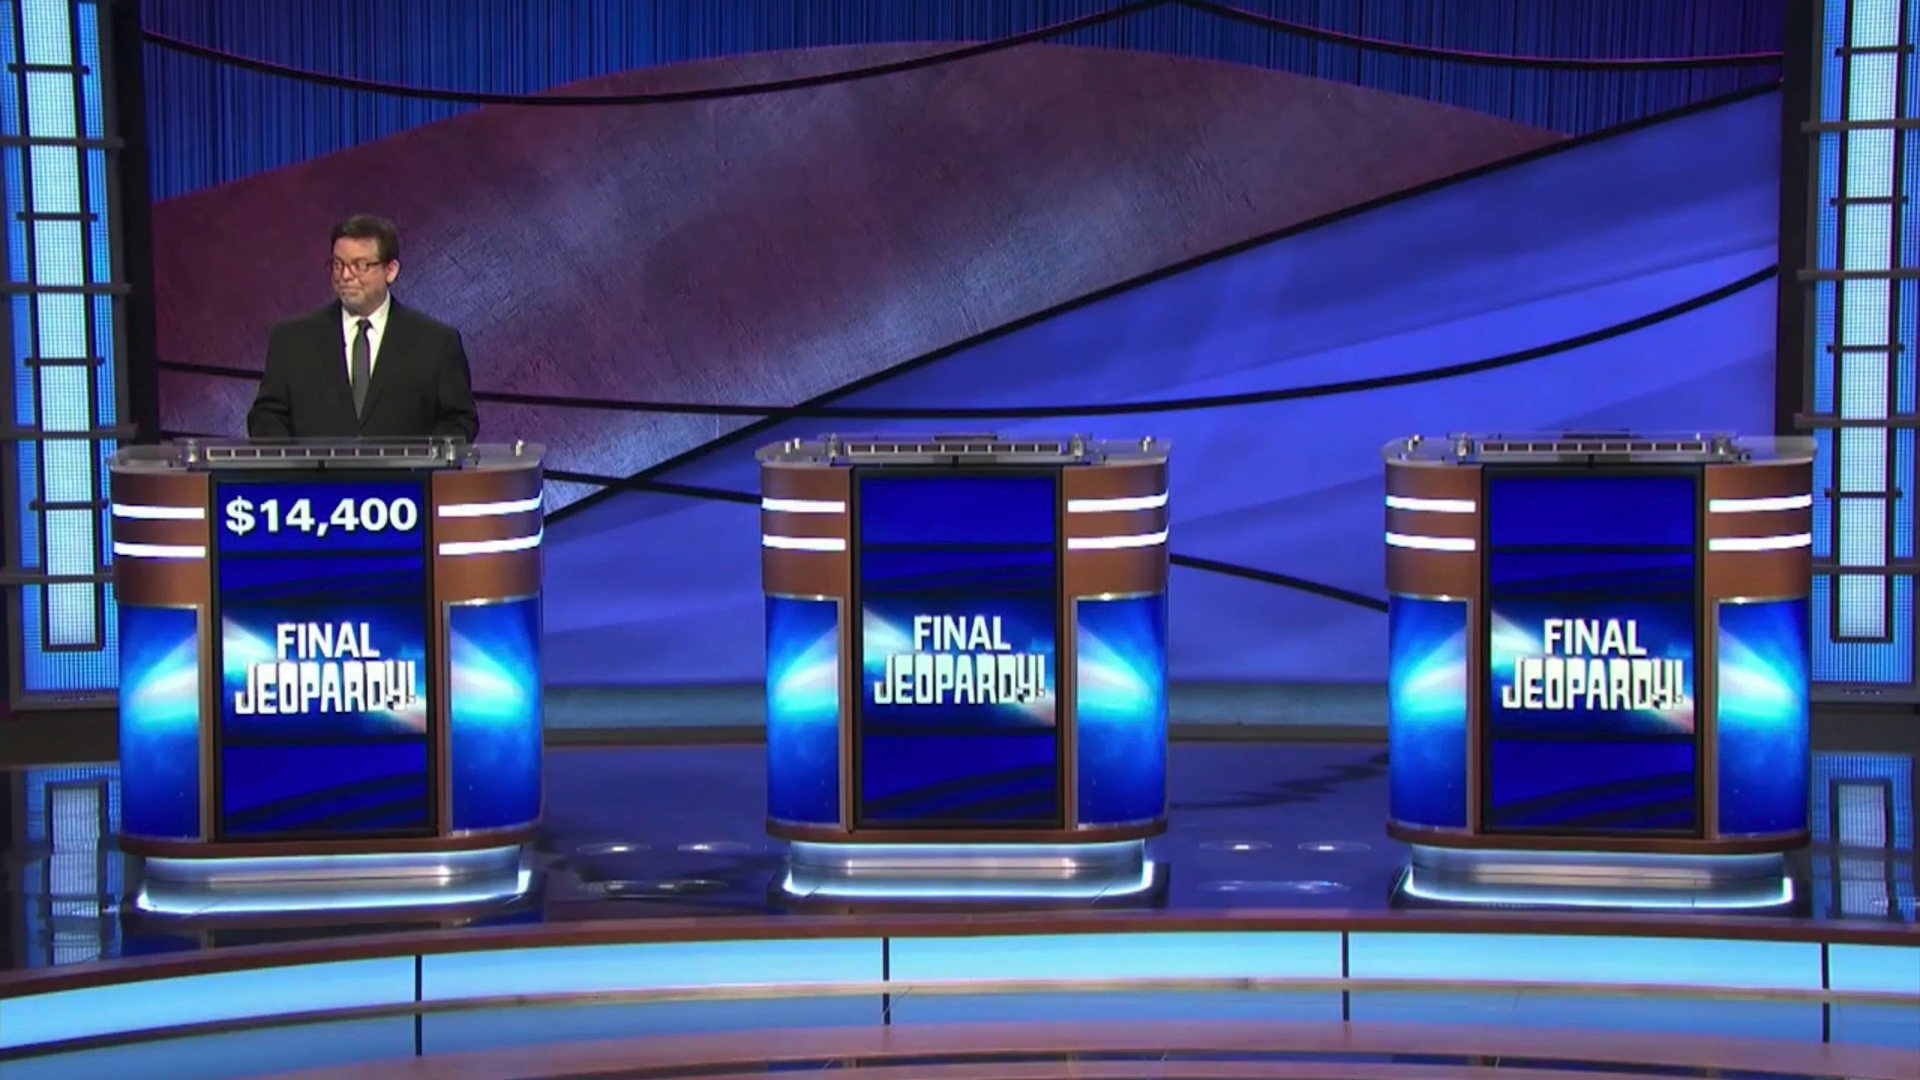 Super rare Final Jeopardy! has fans asking if history was made [Video]